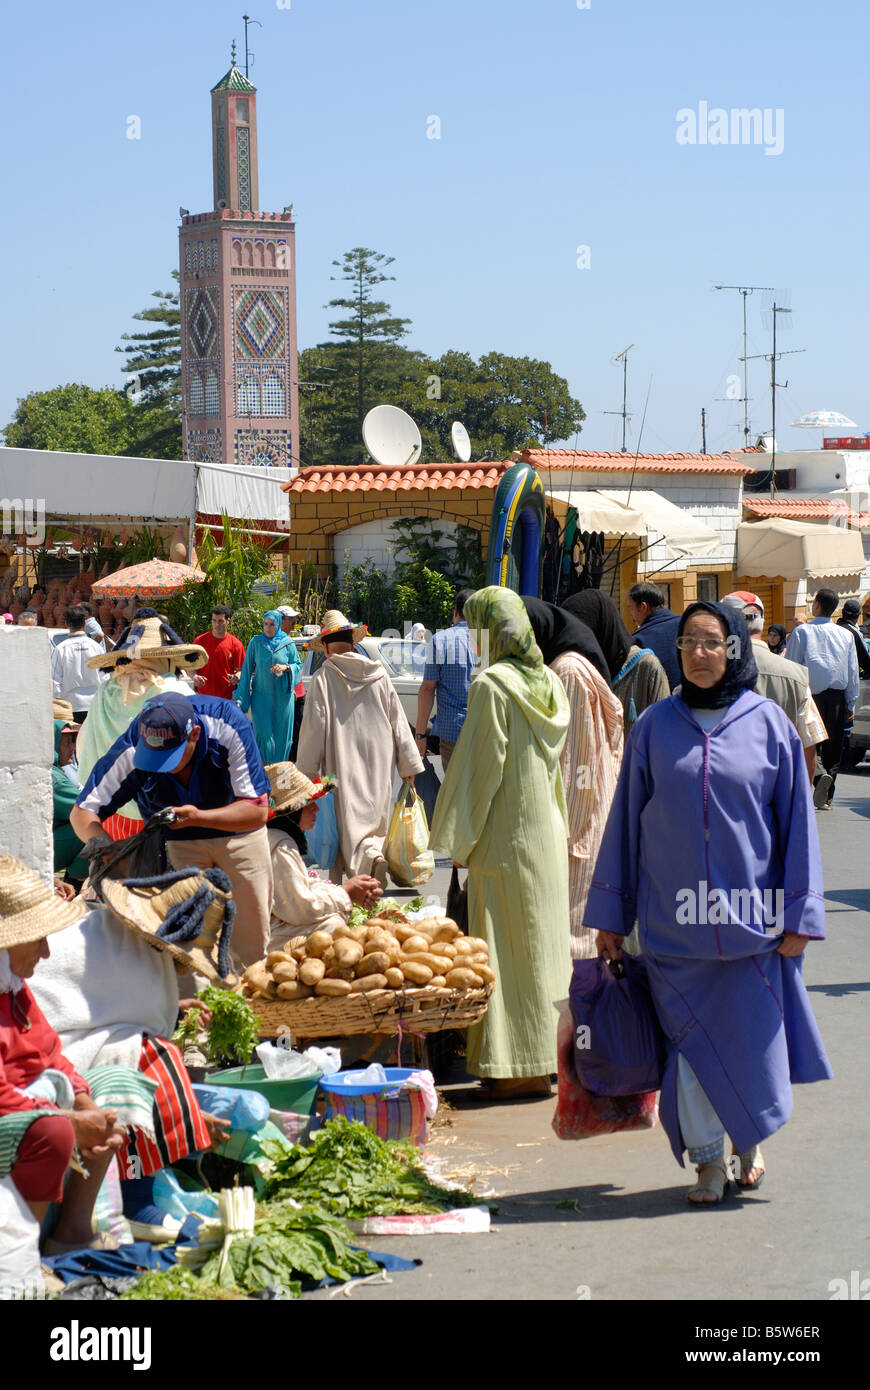 Berber market, Souk Tangiers Fruit and vegetable Market. Morocco North Africa. Stock Photo